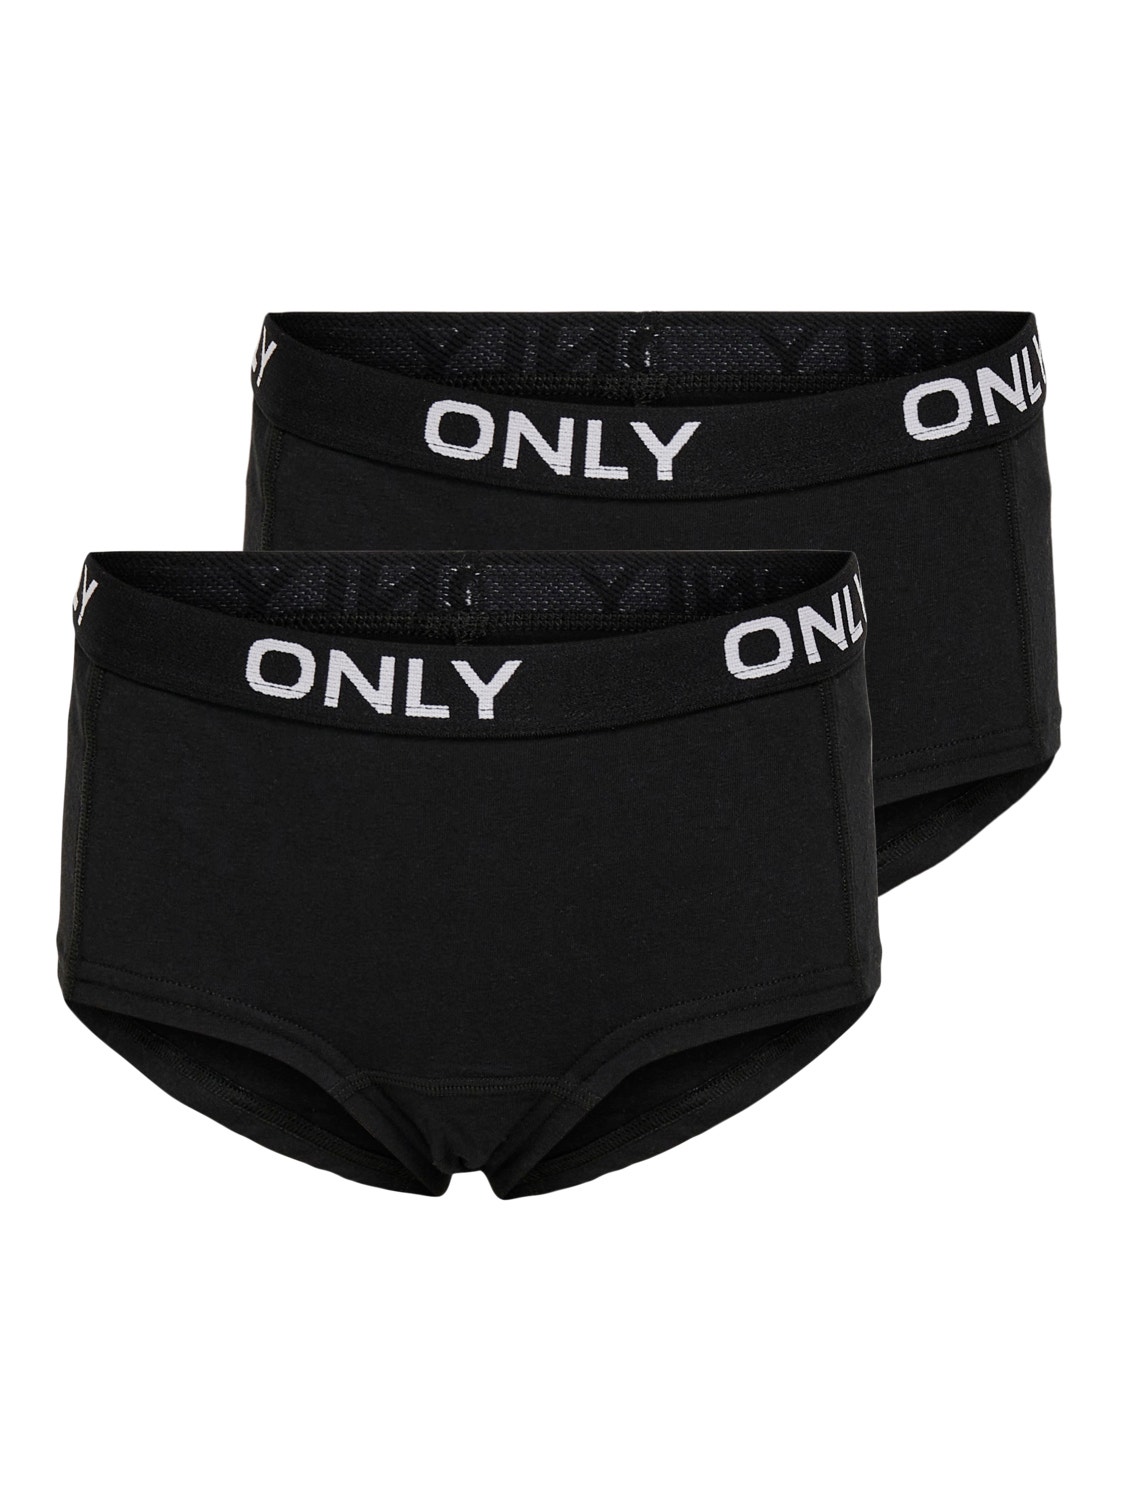 ONLY 2-pack Hipster -Black - 15231550